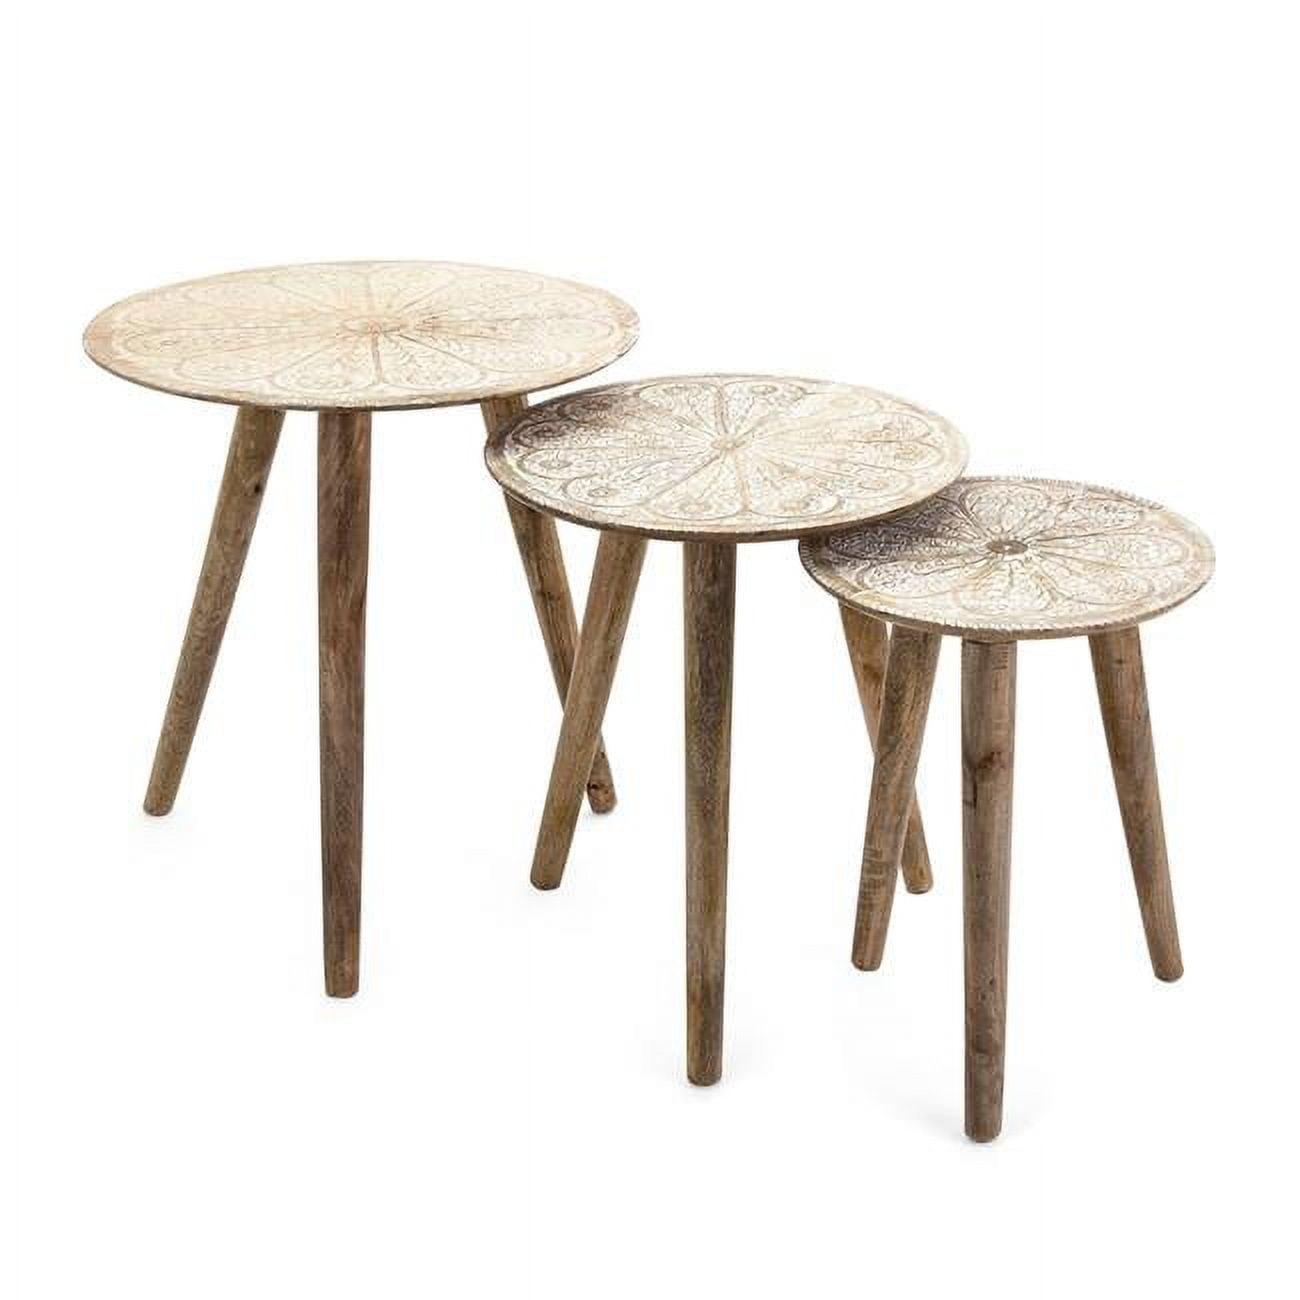 Mango Wood Round Nesting Tables with Floral Carvings, Set of 3